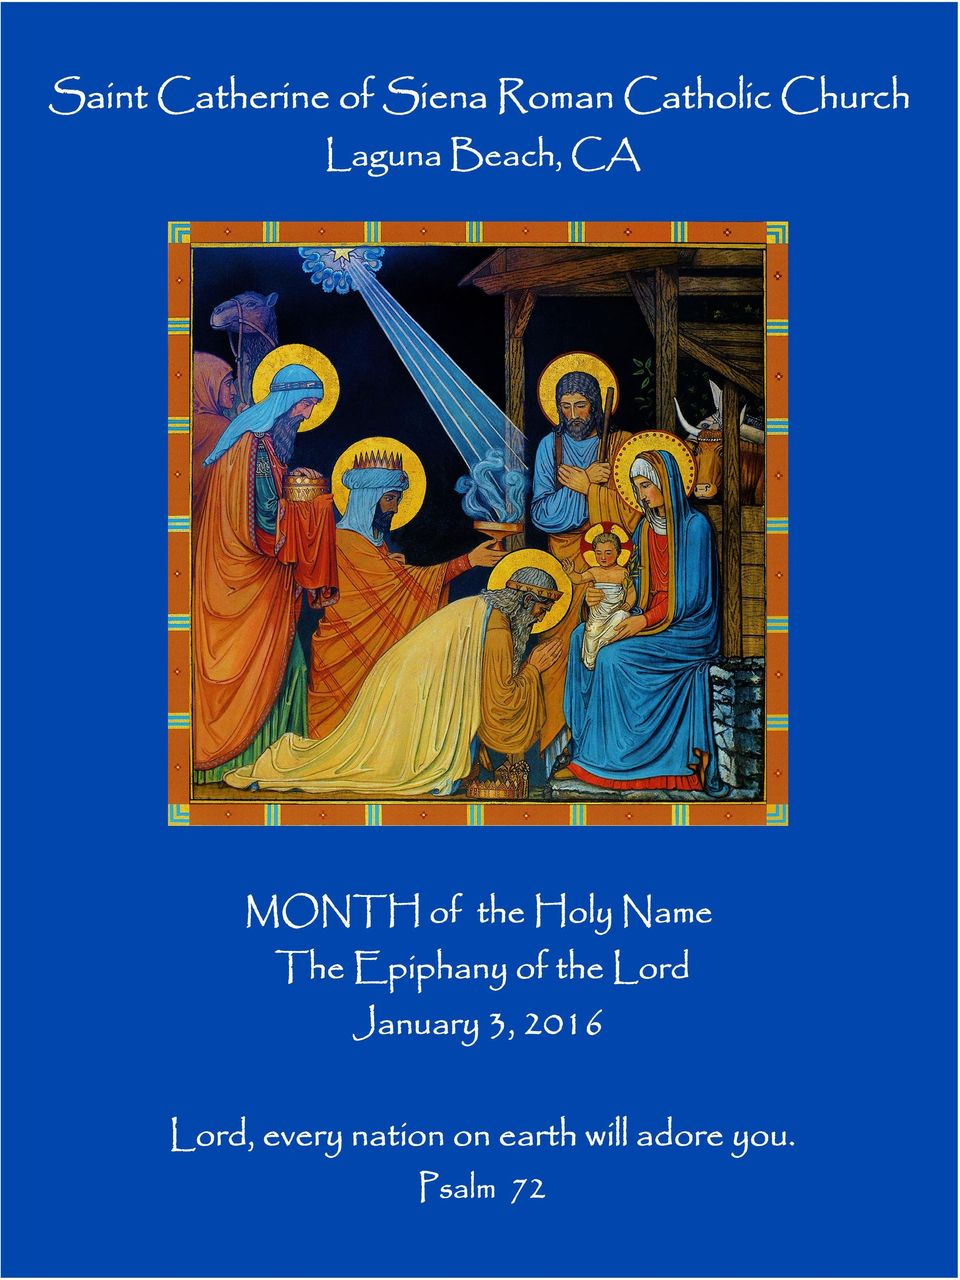 Name The Epiphany of the Lord January 3,